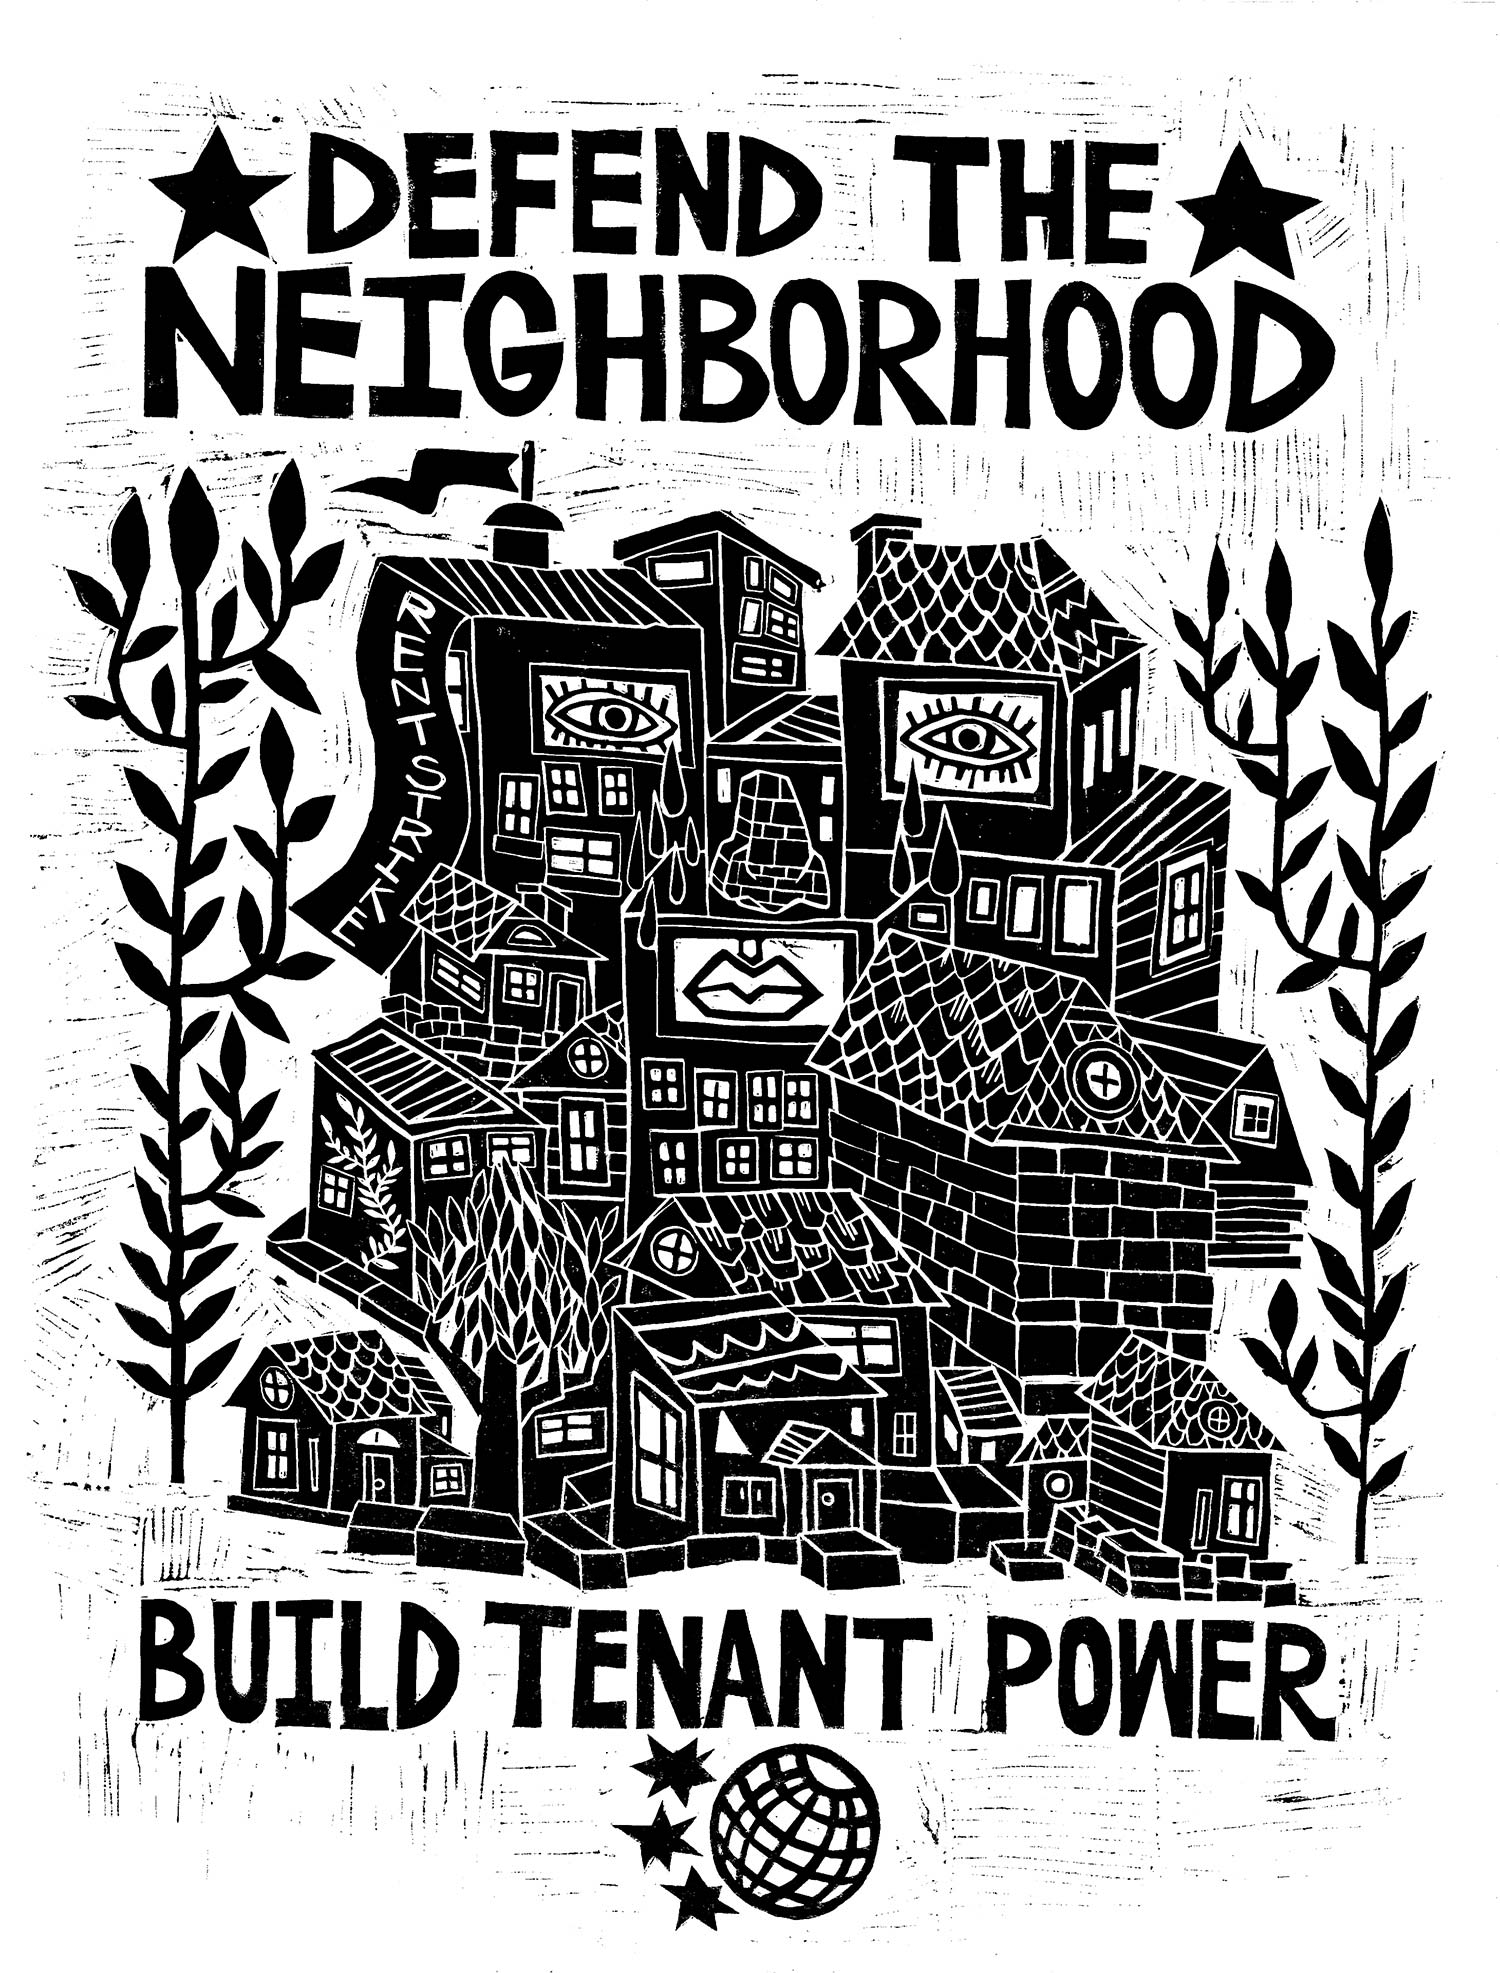 Rent Strike and Tenant Organizing Resources